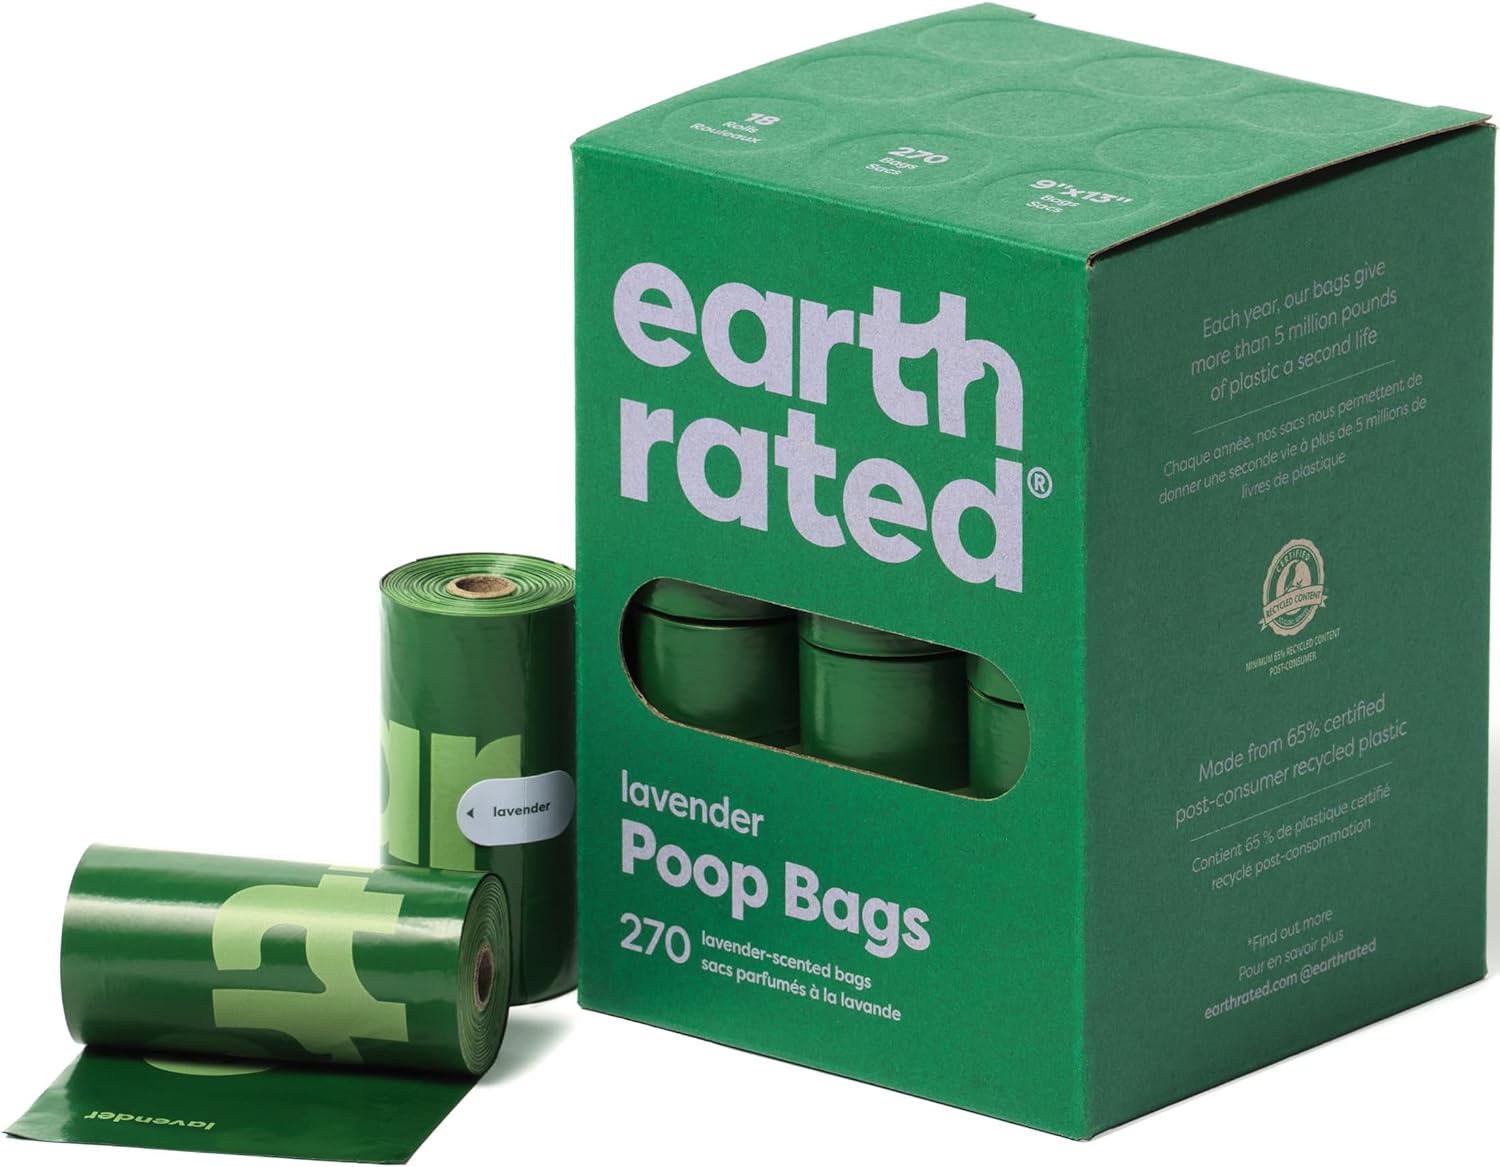 Earth Rated Dog Poop Bags - Leak-Proof and Extra-Thick Pet Waste Bags for Big and Small Dogs - Refill Rolls - Lavender Scented - 270 Count